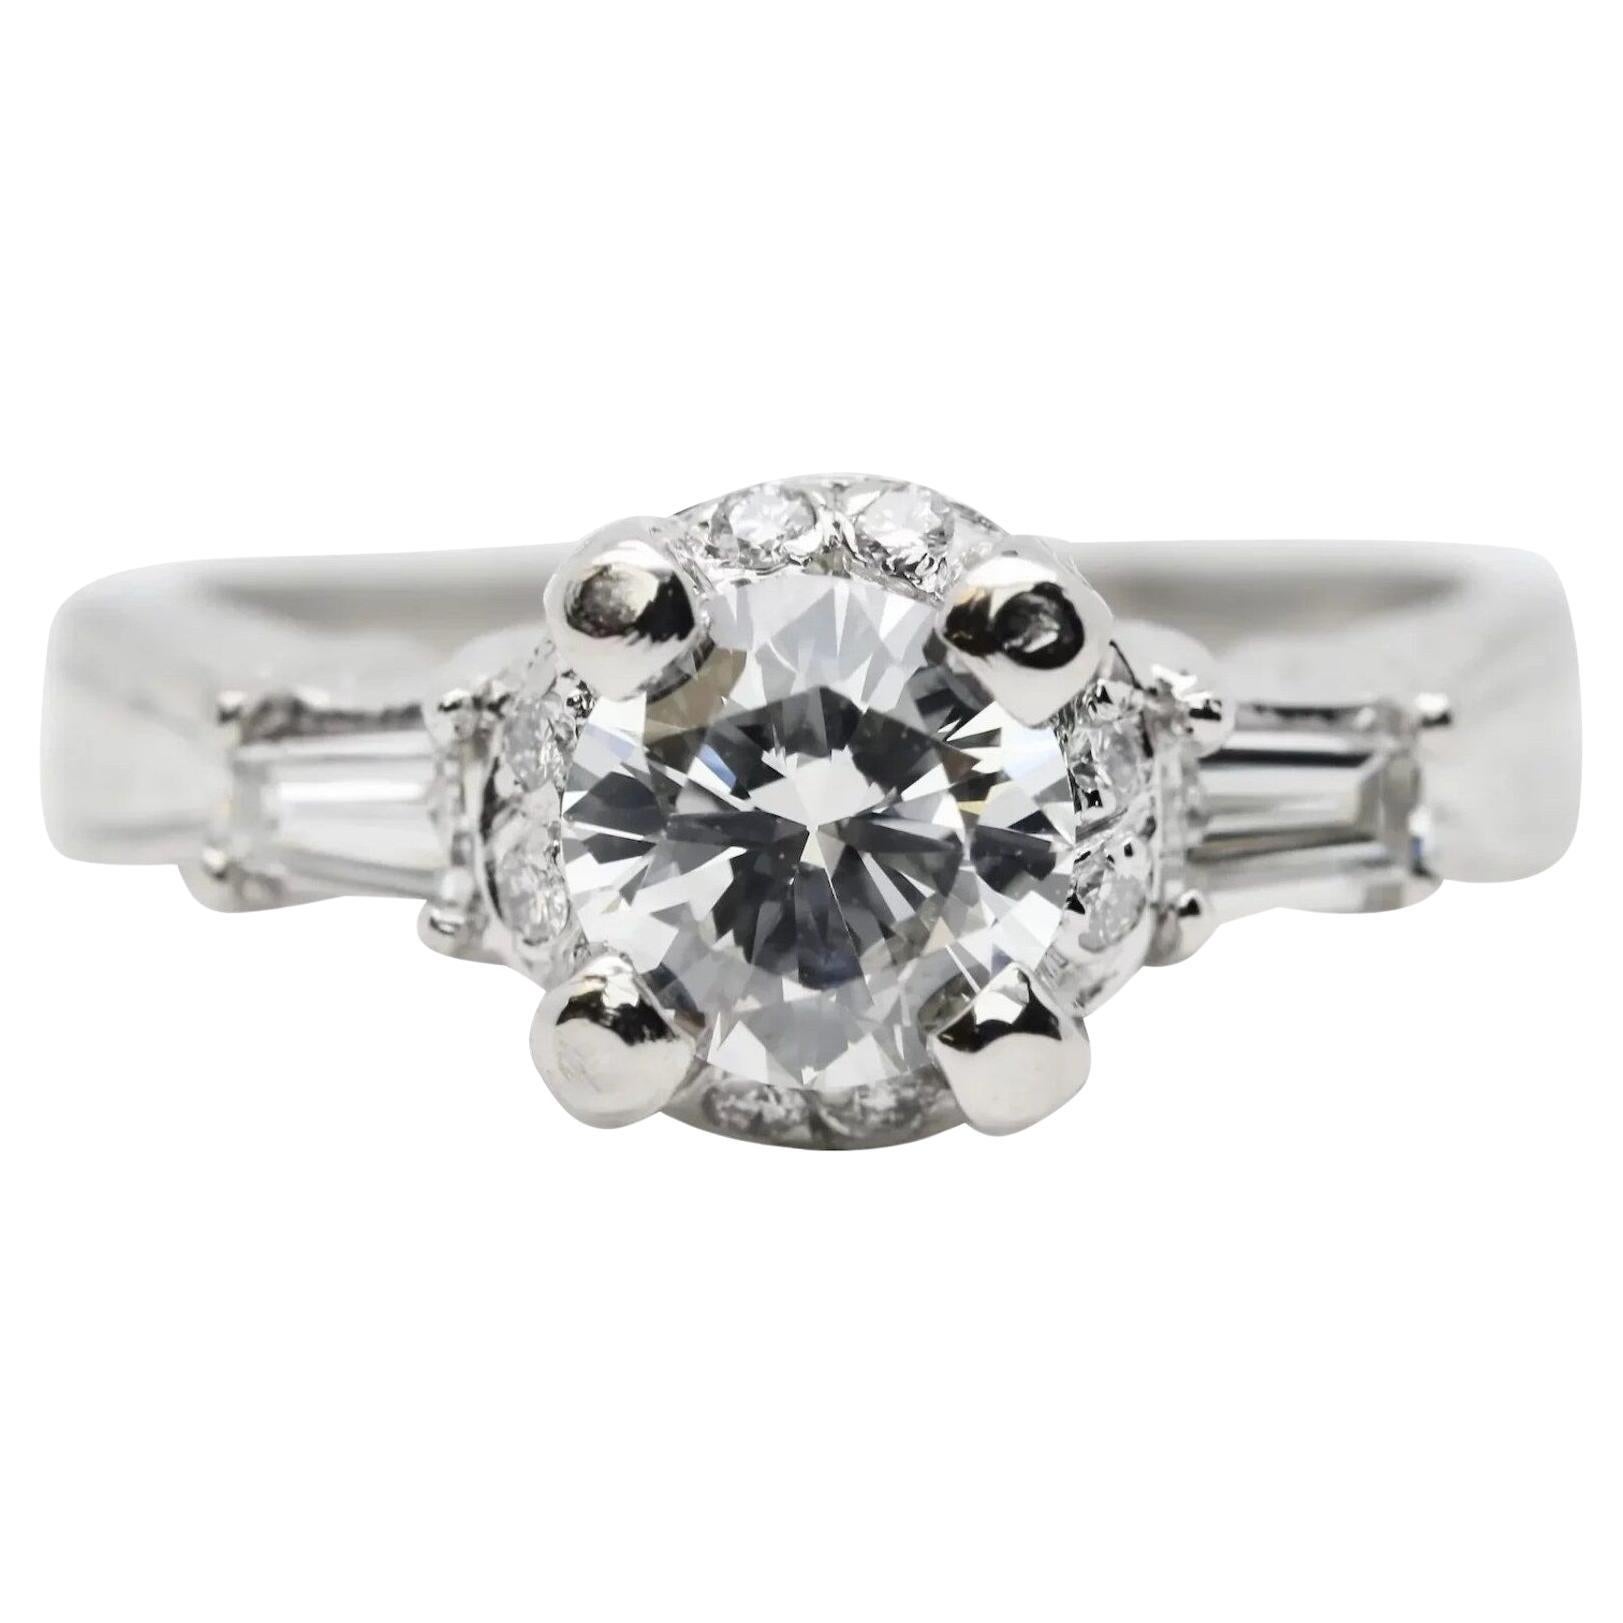 Classic 1.13ctw Diamond Engagement Ring in Platinum Halo Mounting For Sale